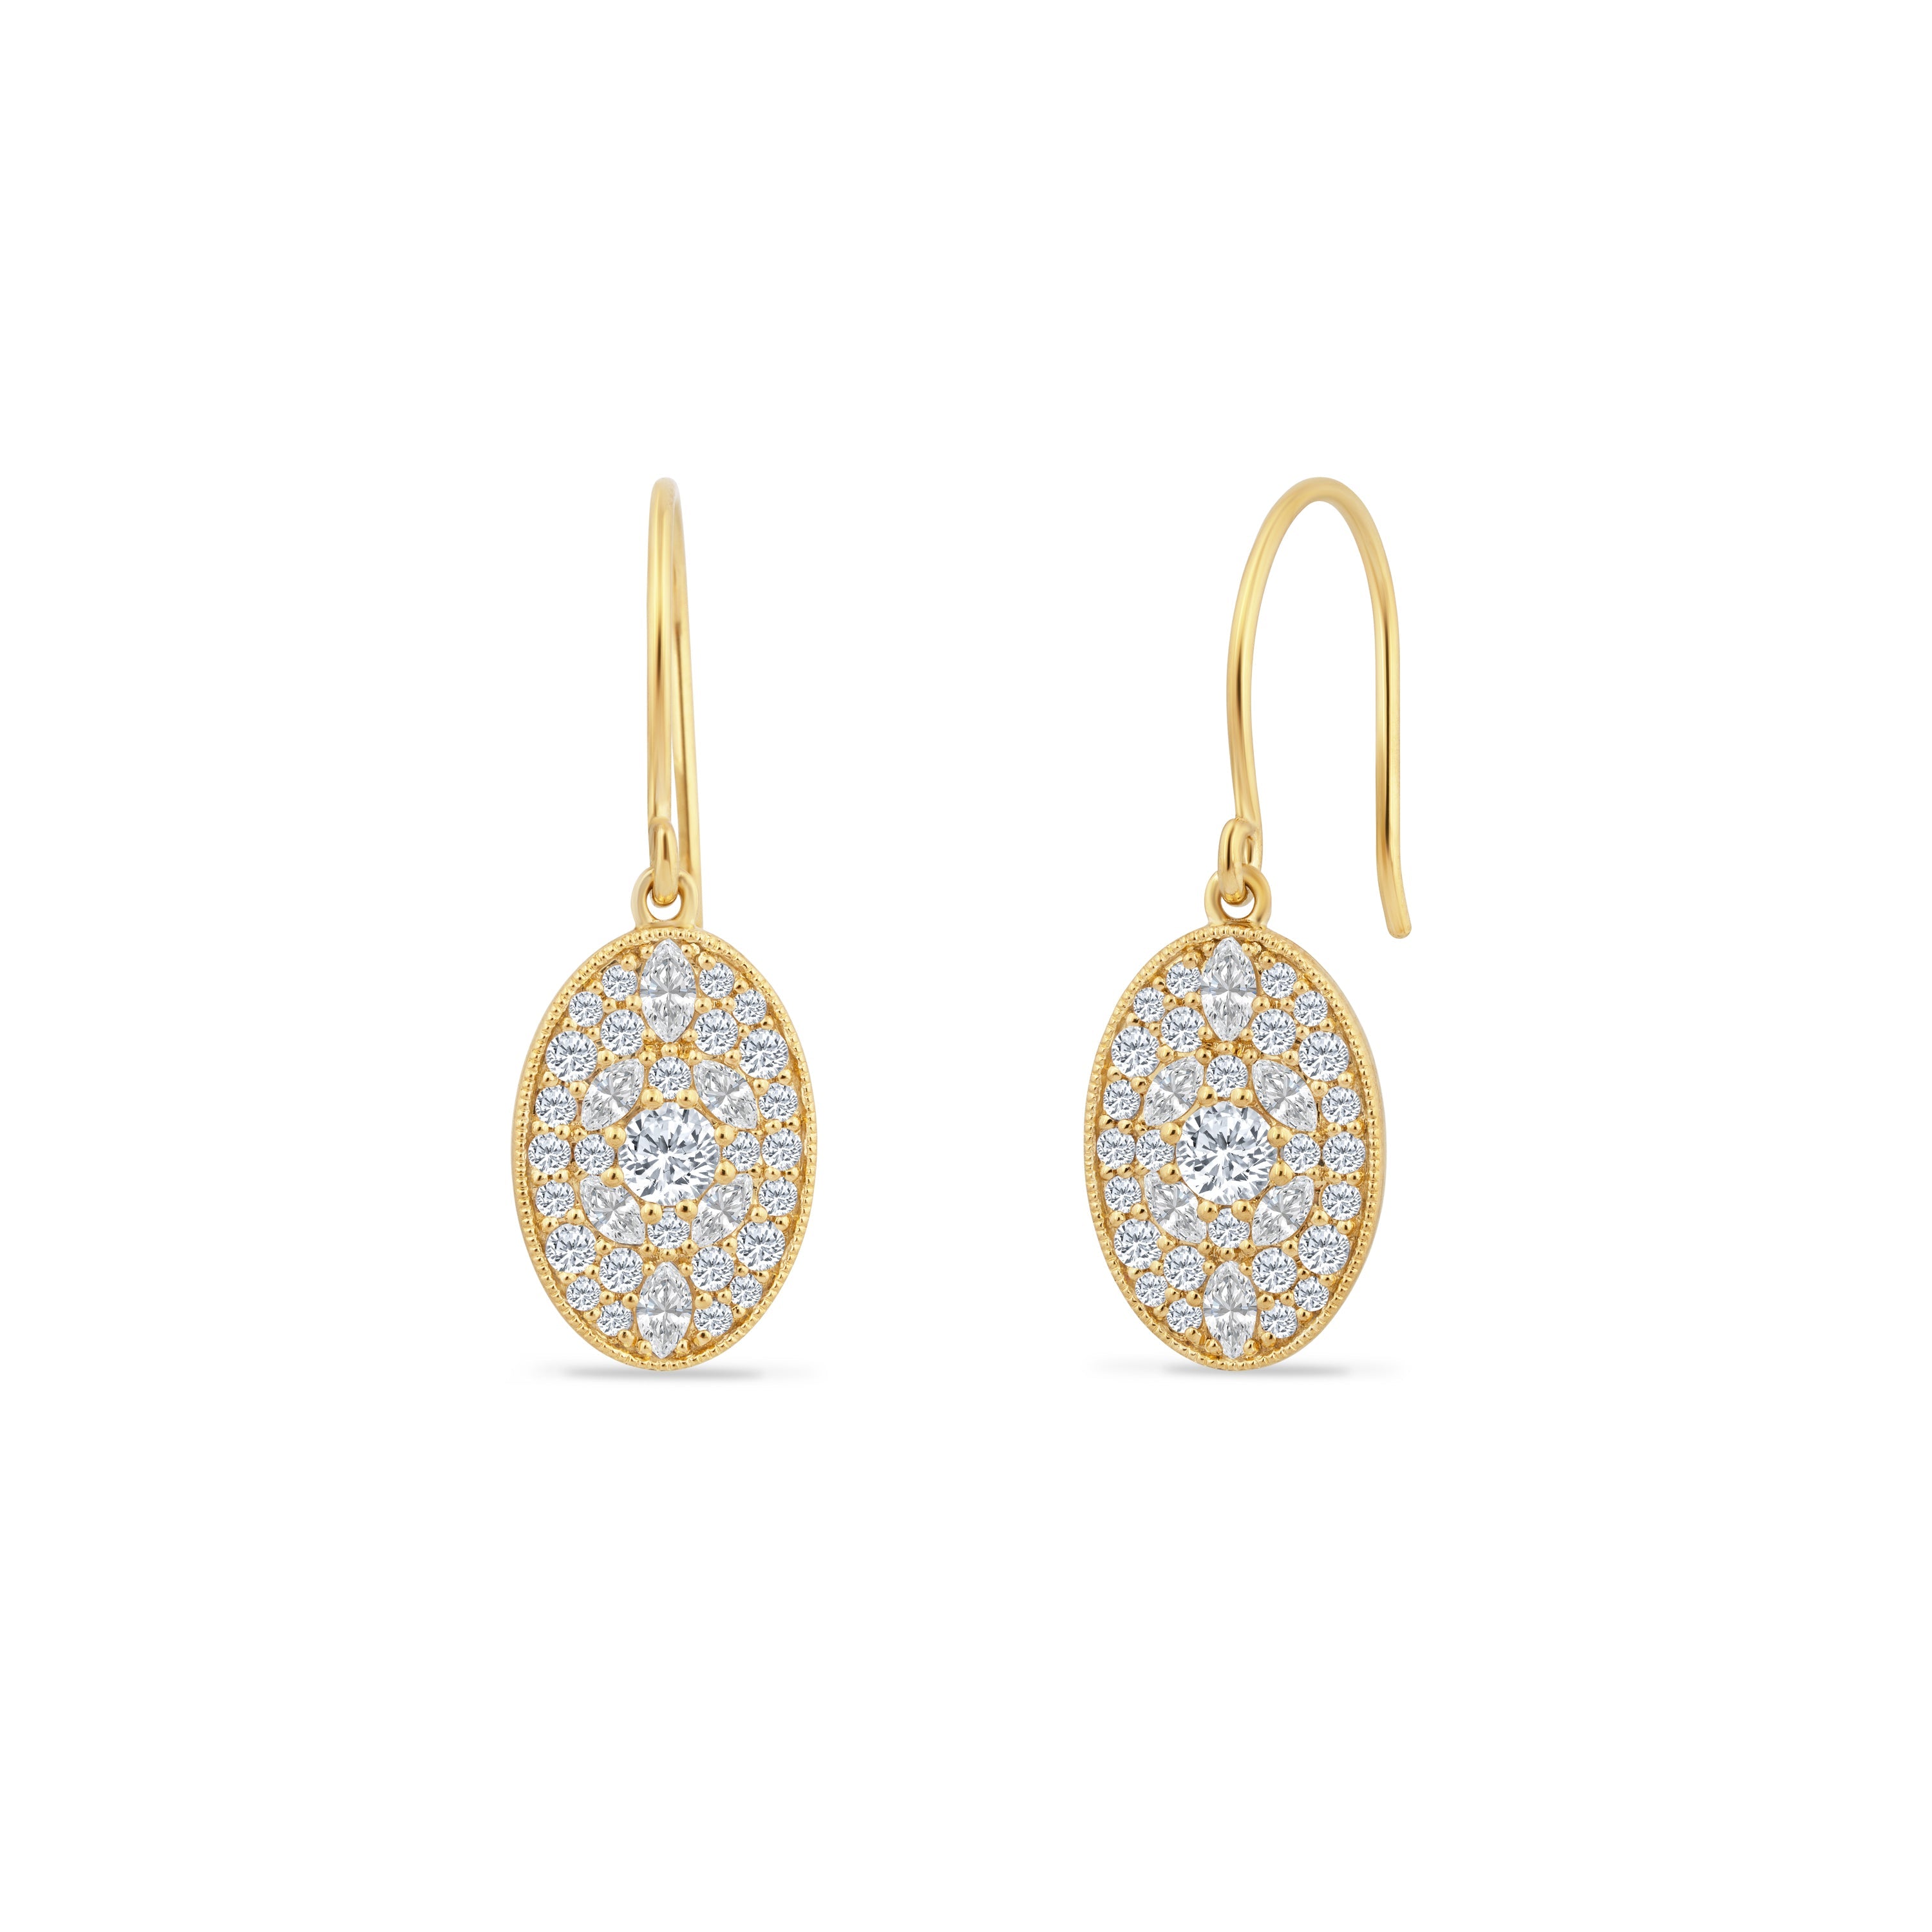 14K OVAL EARRINGS WITH MARQUISE DIAMONDS 0.58CT & ROUND DIAMONDS 0.94CT